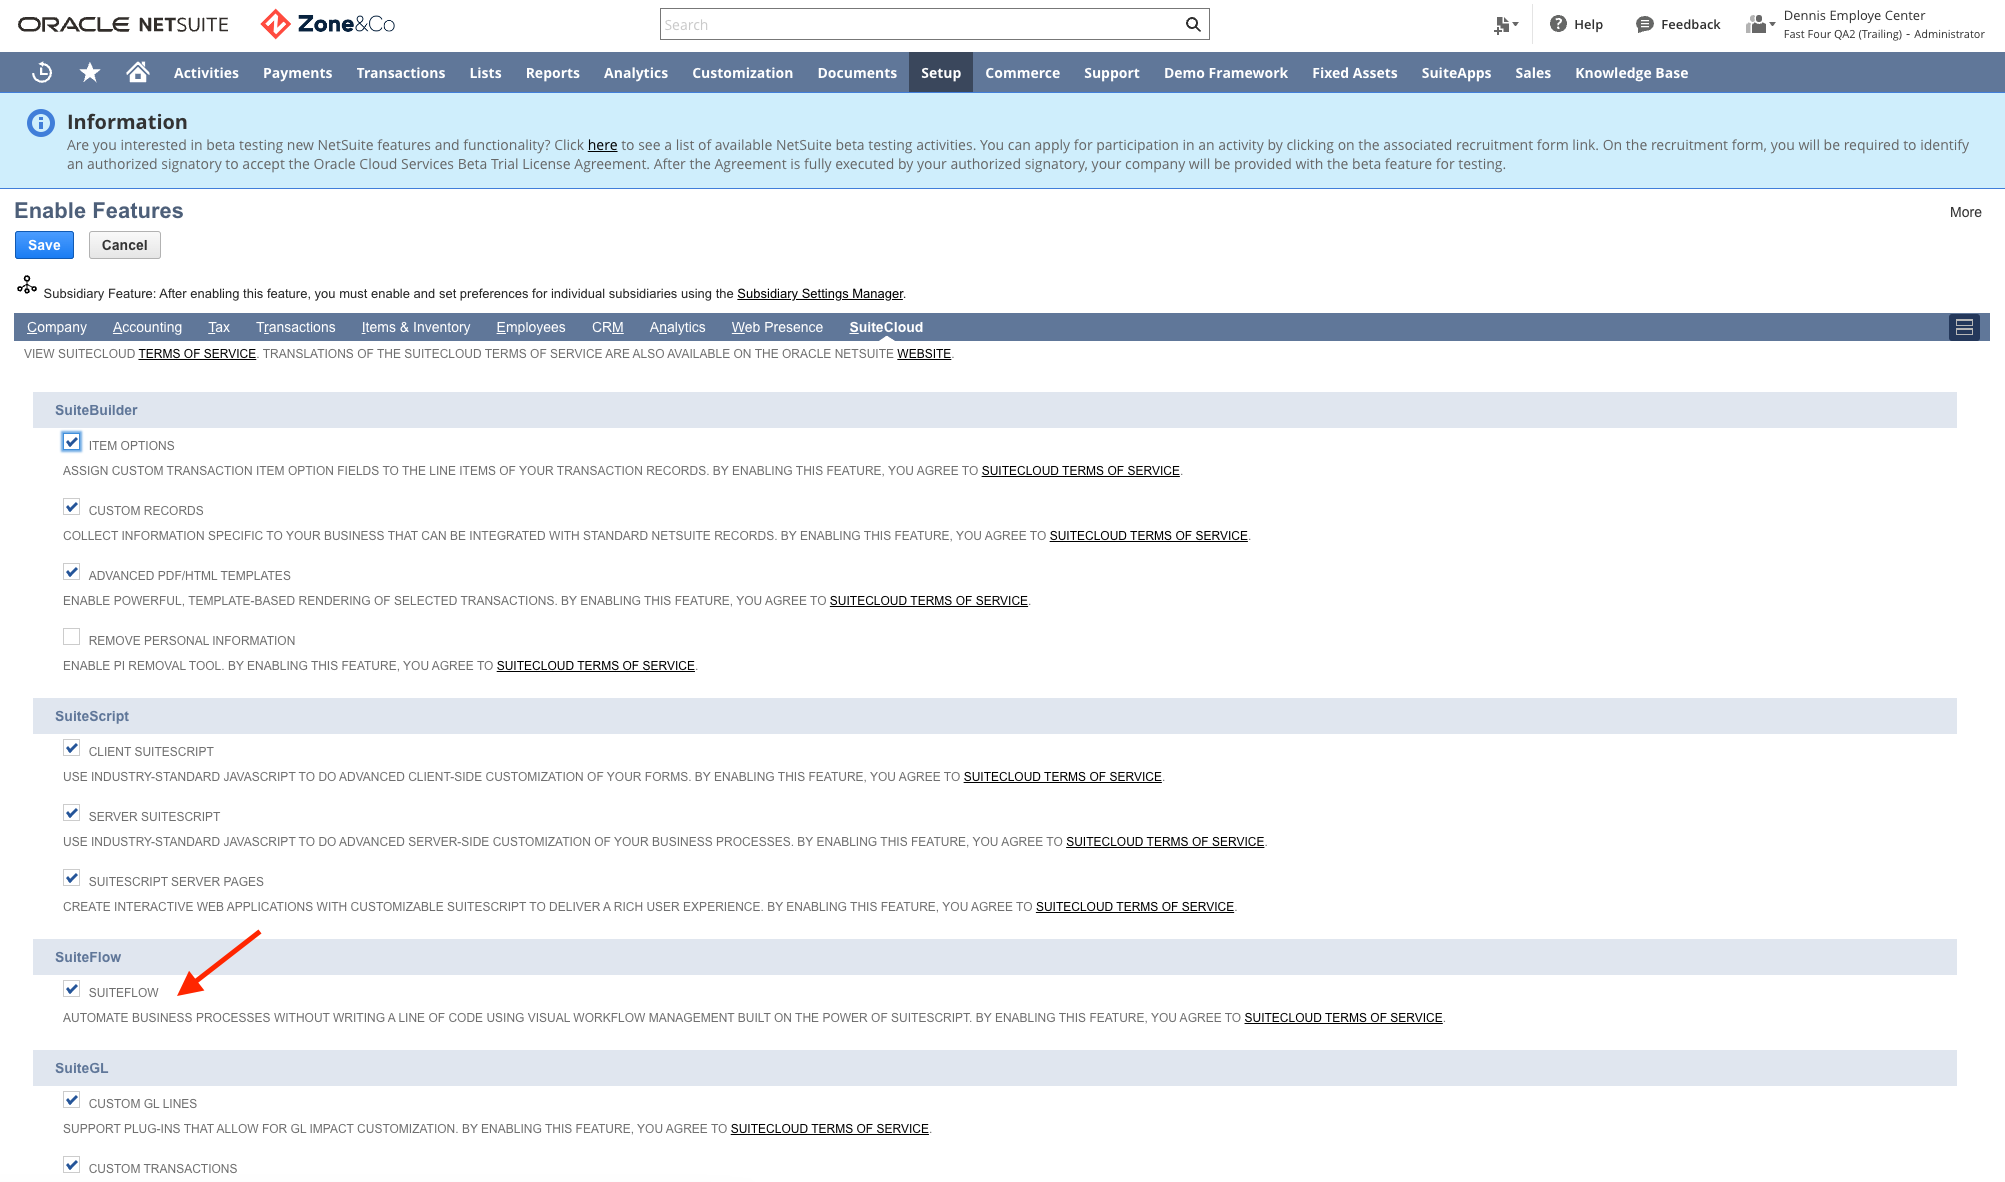 approvals_netsuite_dependencies_3.png